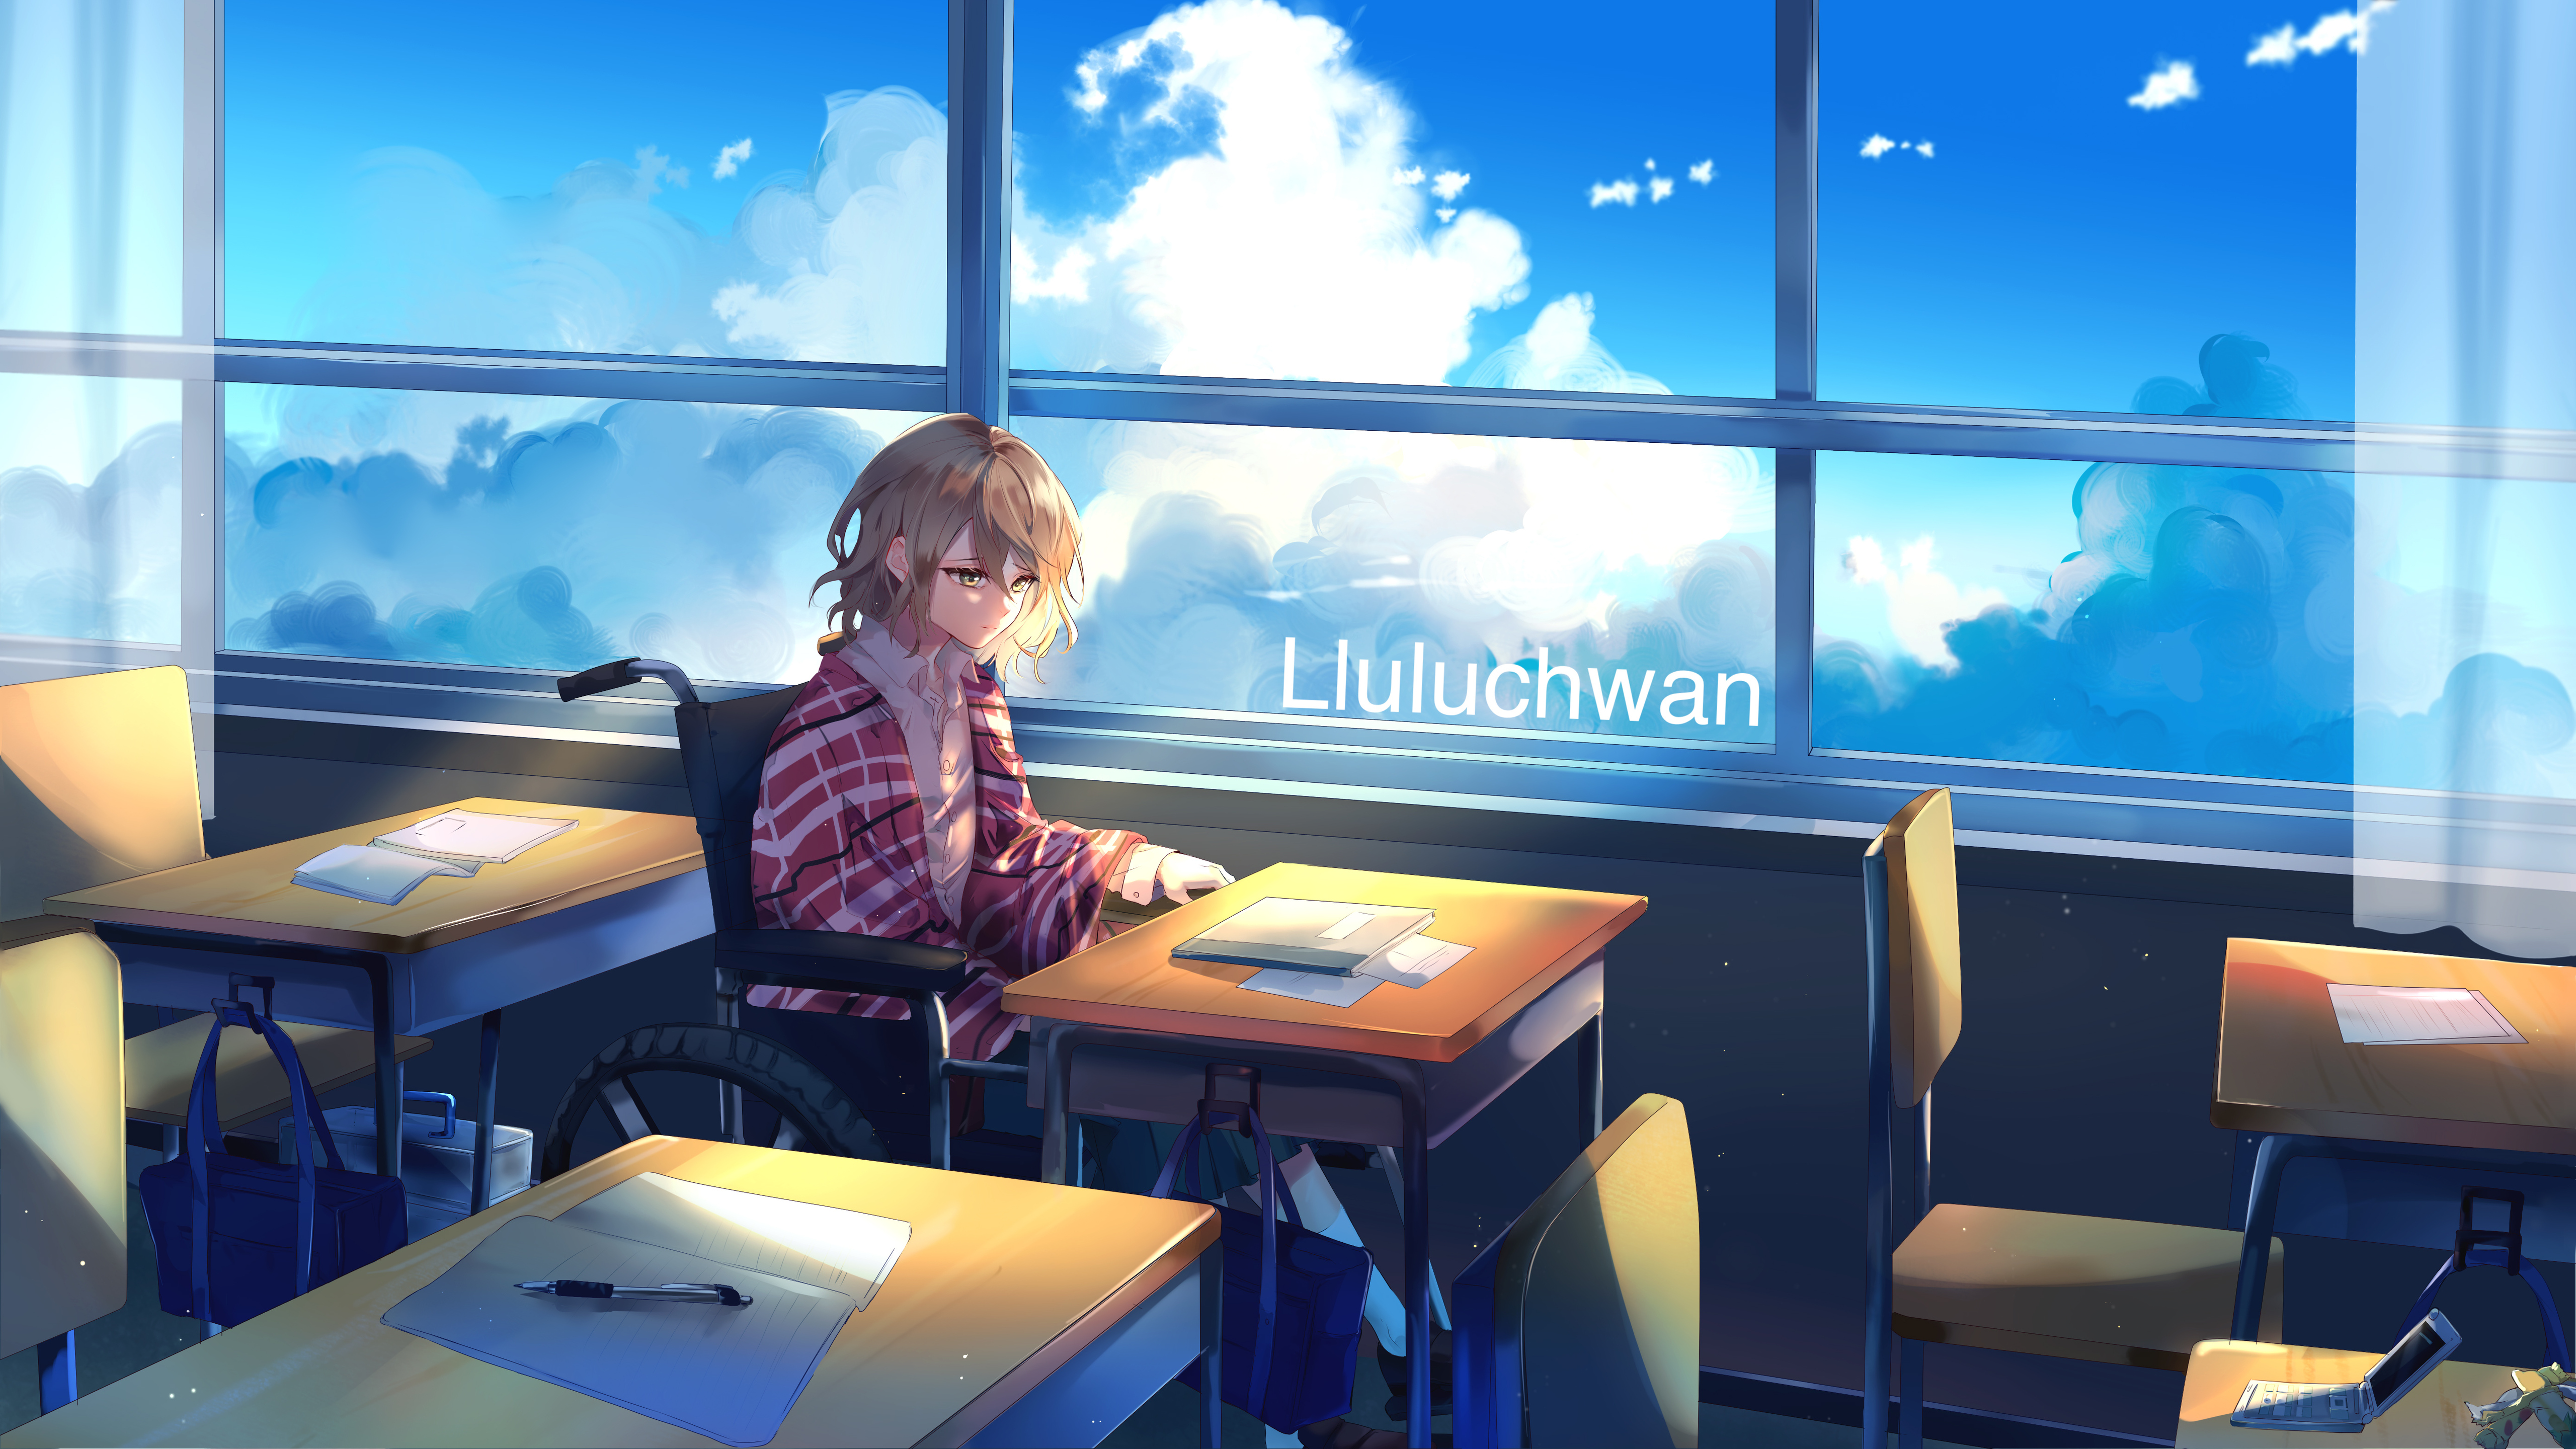 Anime Manga Girl Alone In Class Room 5k 5k HD 4k Wallpaper, Image, Background, Photo and Picture